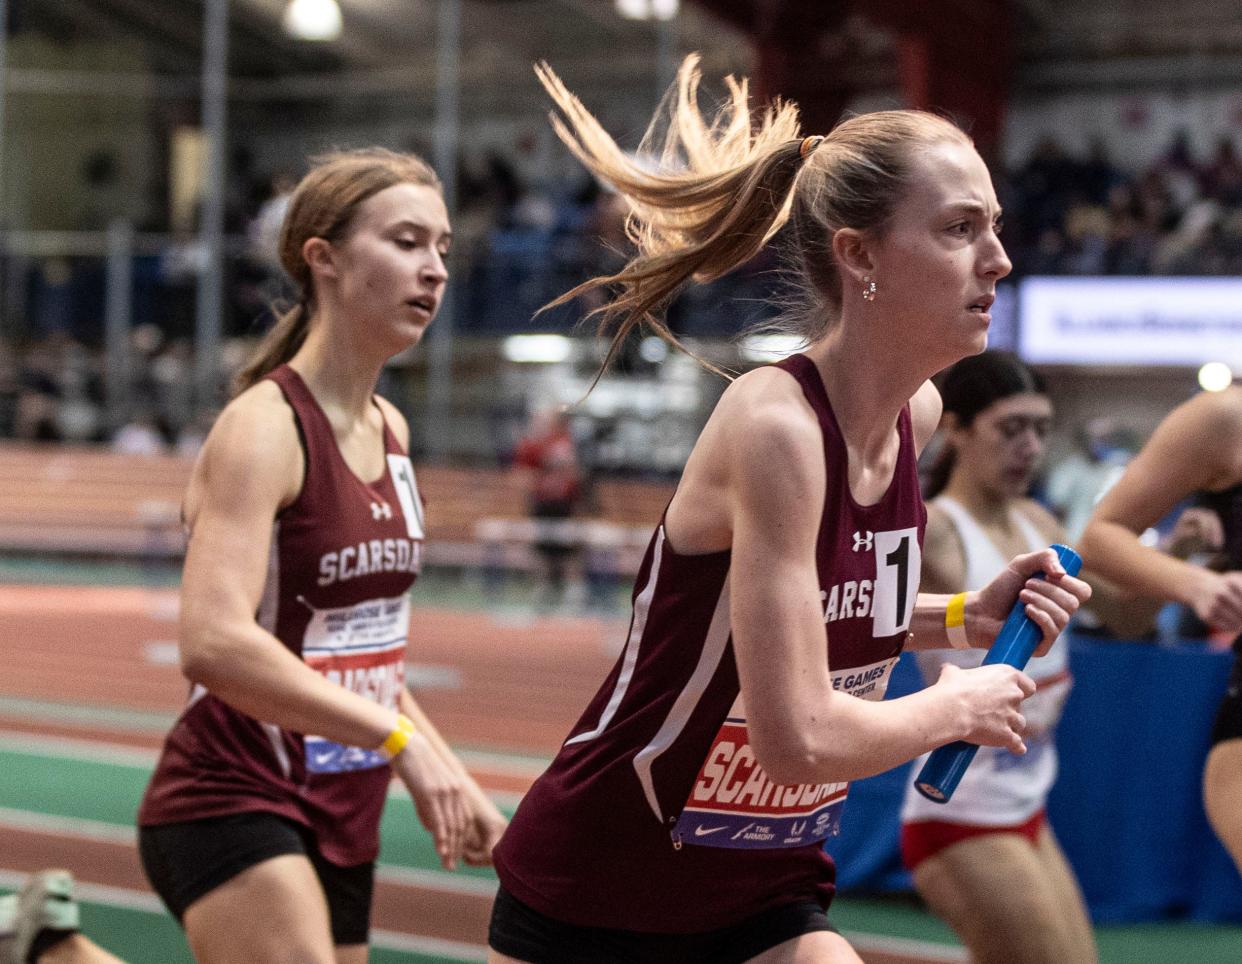 Feb 11, 2024; New York, New York, USA; Shannon Kelly takes the baton from Eva Gibney as Scarsdale competes in the Girls 4 x 400 meter relay during the Millrose Games at The Armory in New York City Feb. 11, 2024. Mandatory Credit: Seth Harrison-Westchester County Journal News